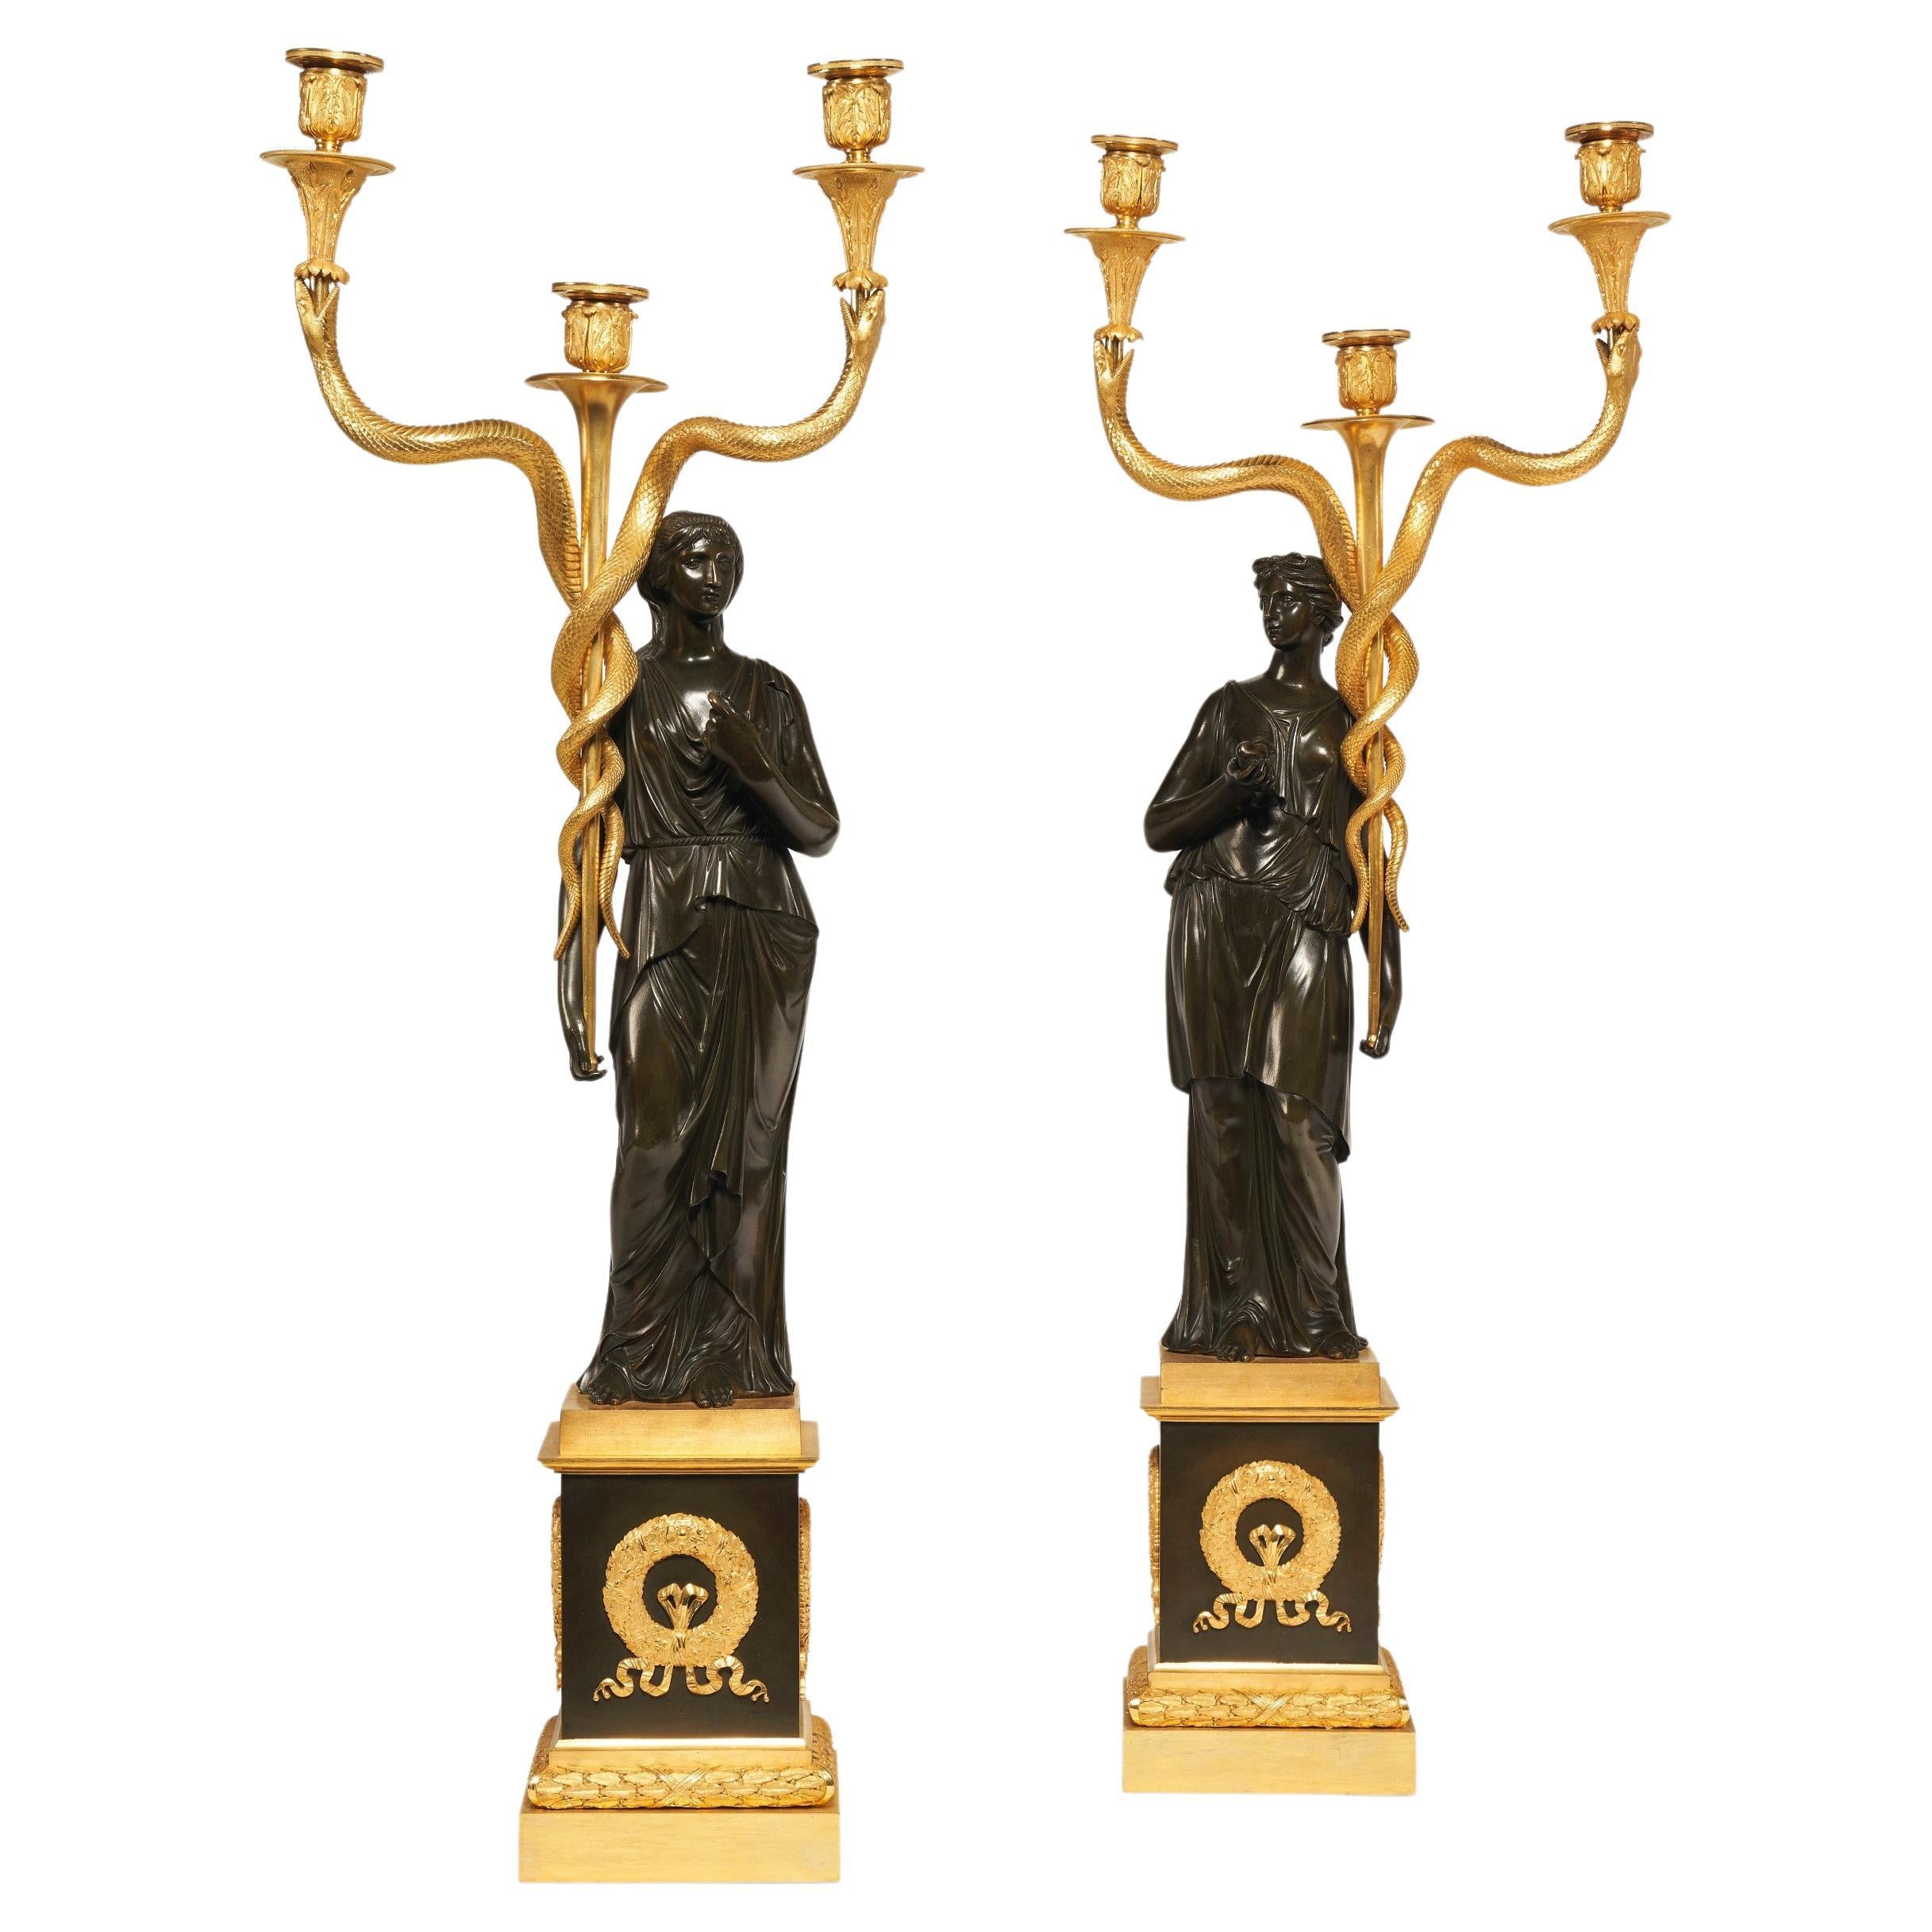 19th Century French Empire Style Ormolu and Patinated Bronze Figural Candelabra